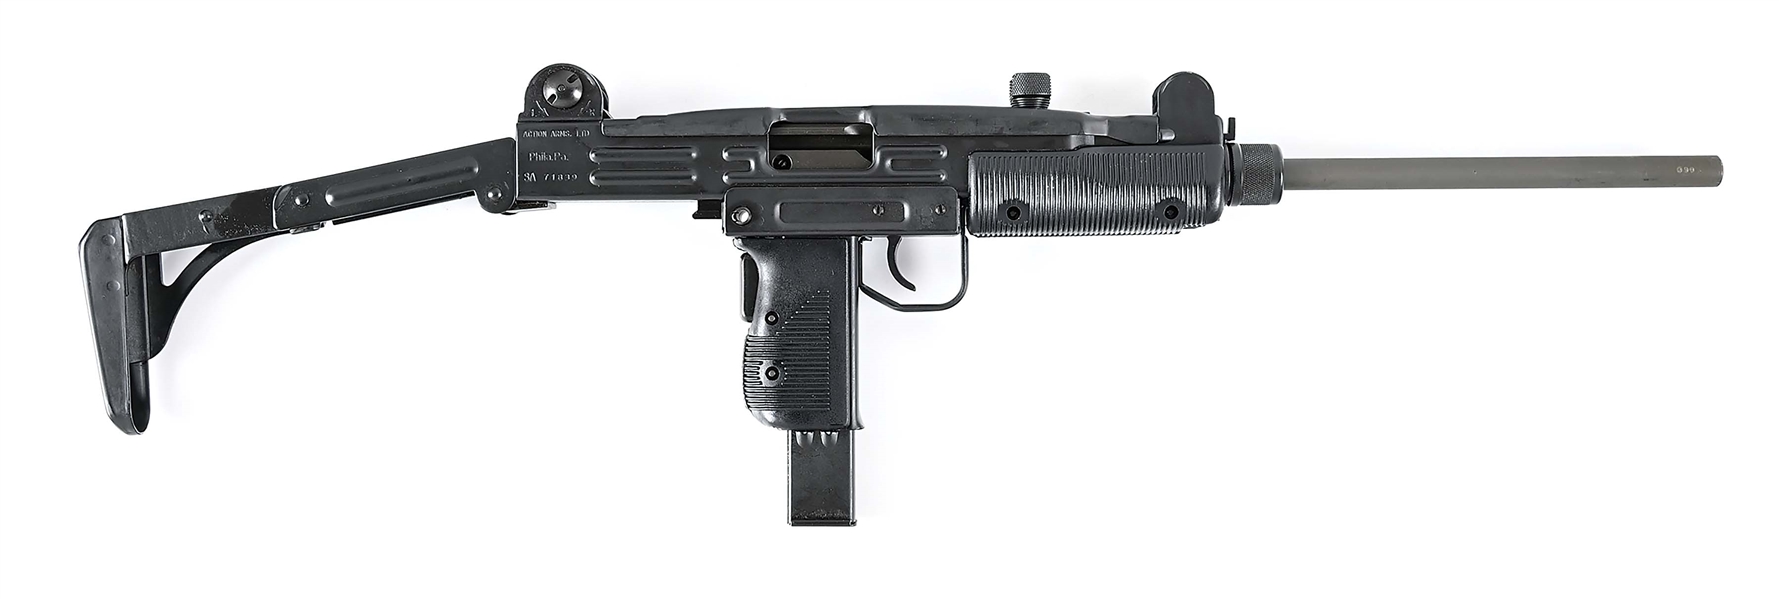 (M) HIGH CONDITION ISRAELI MILITARY INDUSTRIES / ACTION ARMS UZI MODEL B 9MM PARA SEMI-AUTOMATIC RIFLE WITH CASE & ACCESSORIES.